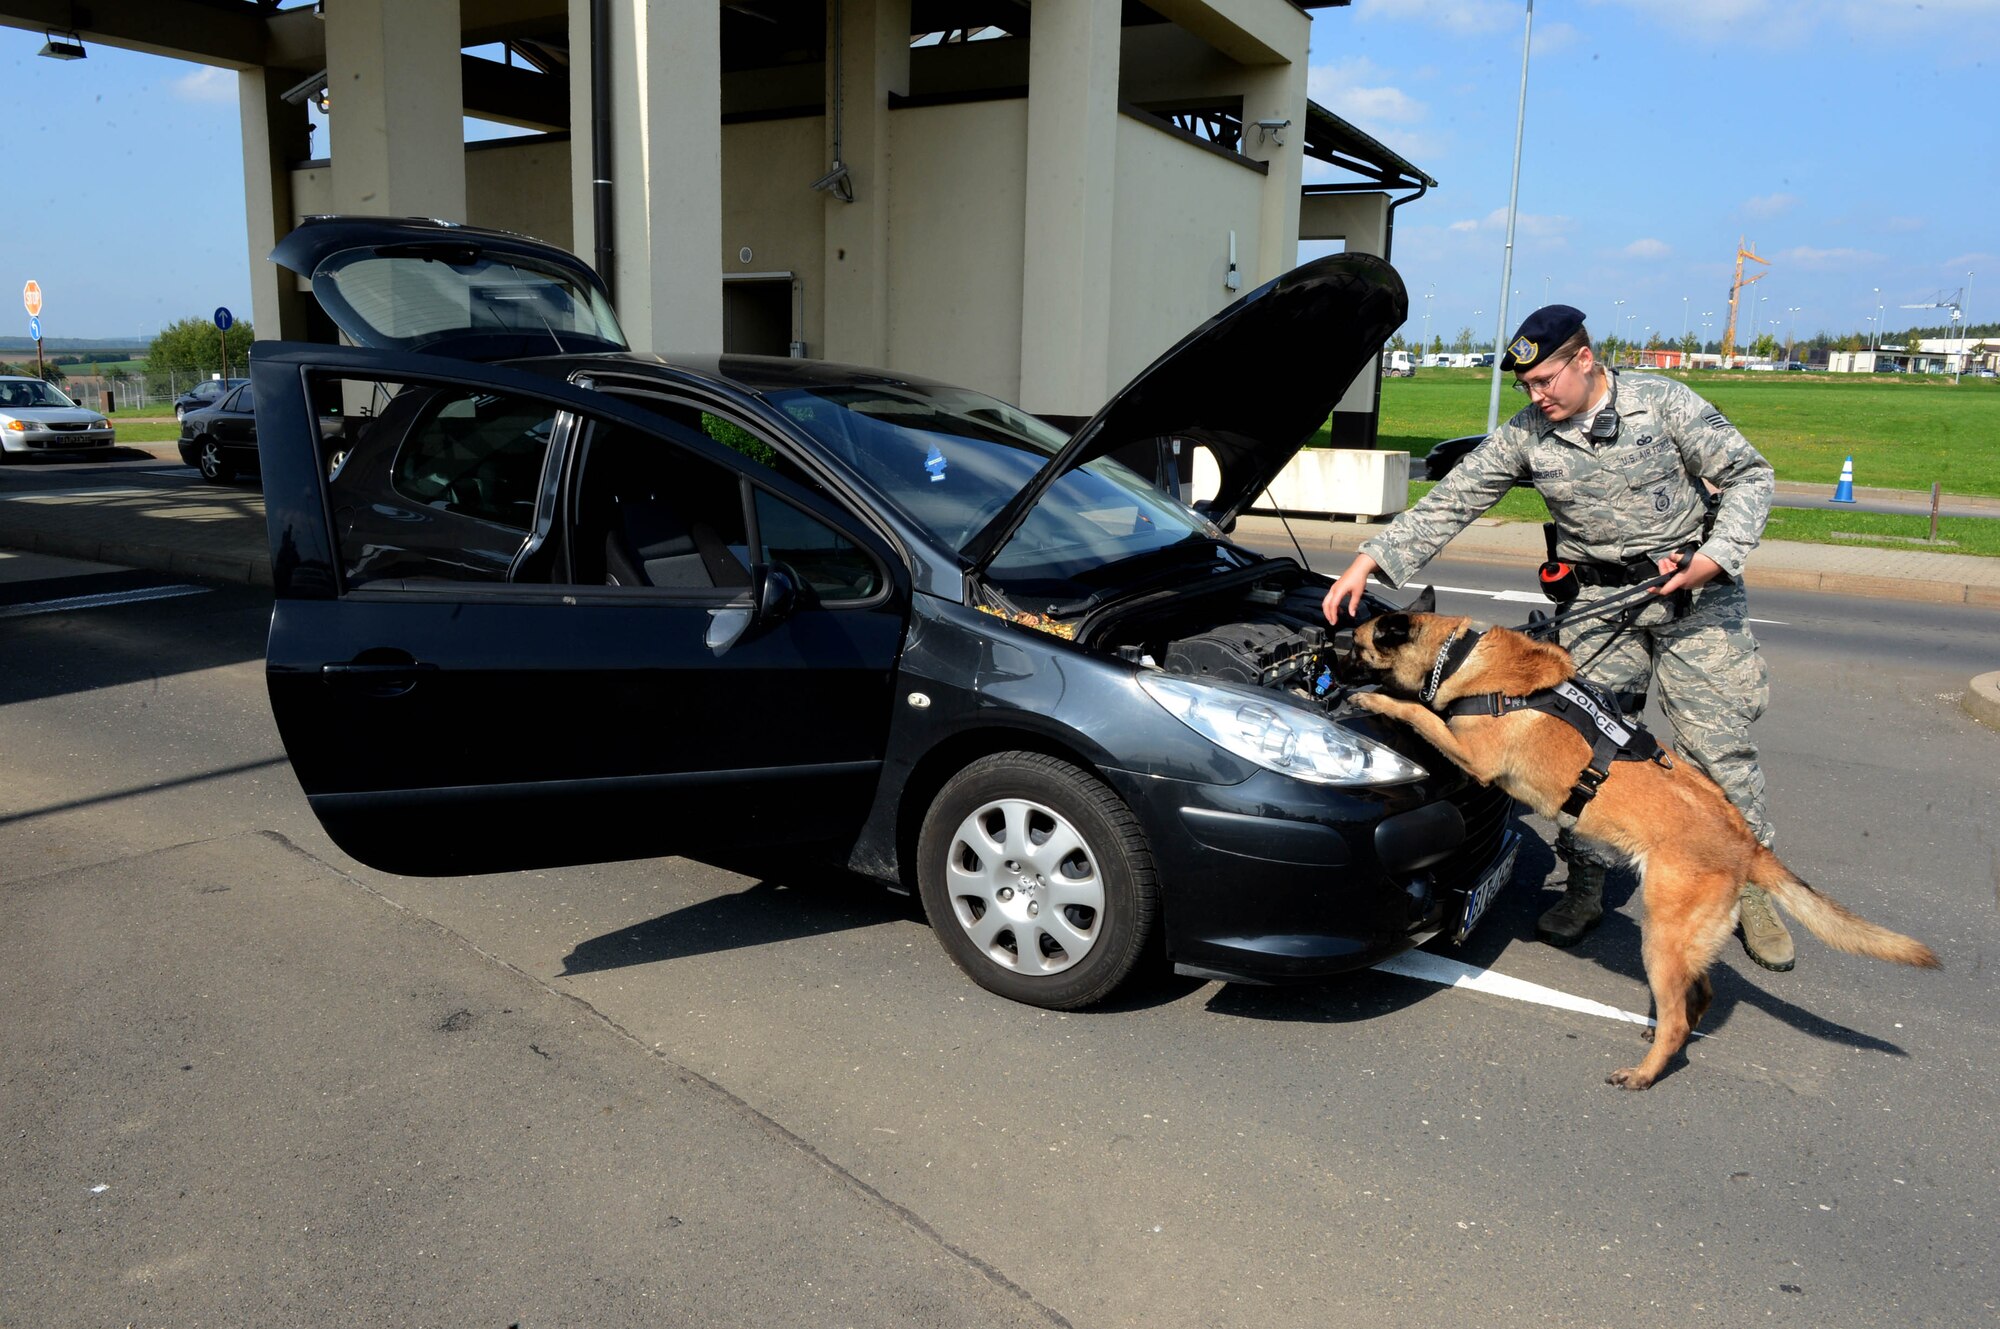 U.S. Air Force Staff Sgt. Adrienne Neuburger, 52nd Security Forces Squadron dog handler and native of Weiser, Idaho, instructs her military working dog, Joice, to search the engine-well of a vehicle before it is allowed entrance to Spangdahlem Air Base, Germany, Sept., 9, 2014. Joice searched the car before an entry controller performed a more in-depth search of the vehicle. Police dogs use their sense of smell to detect explosives, drugs or other harmful substances. (U.S. Air Force photo by Airman 1st Class Kyle Gese/Released)